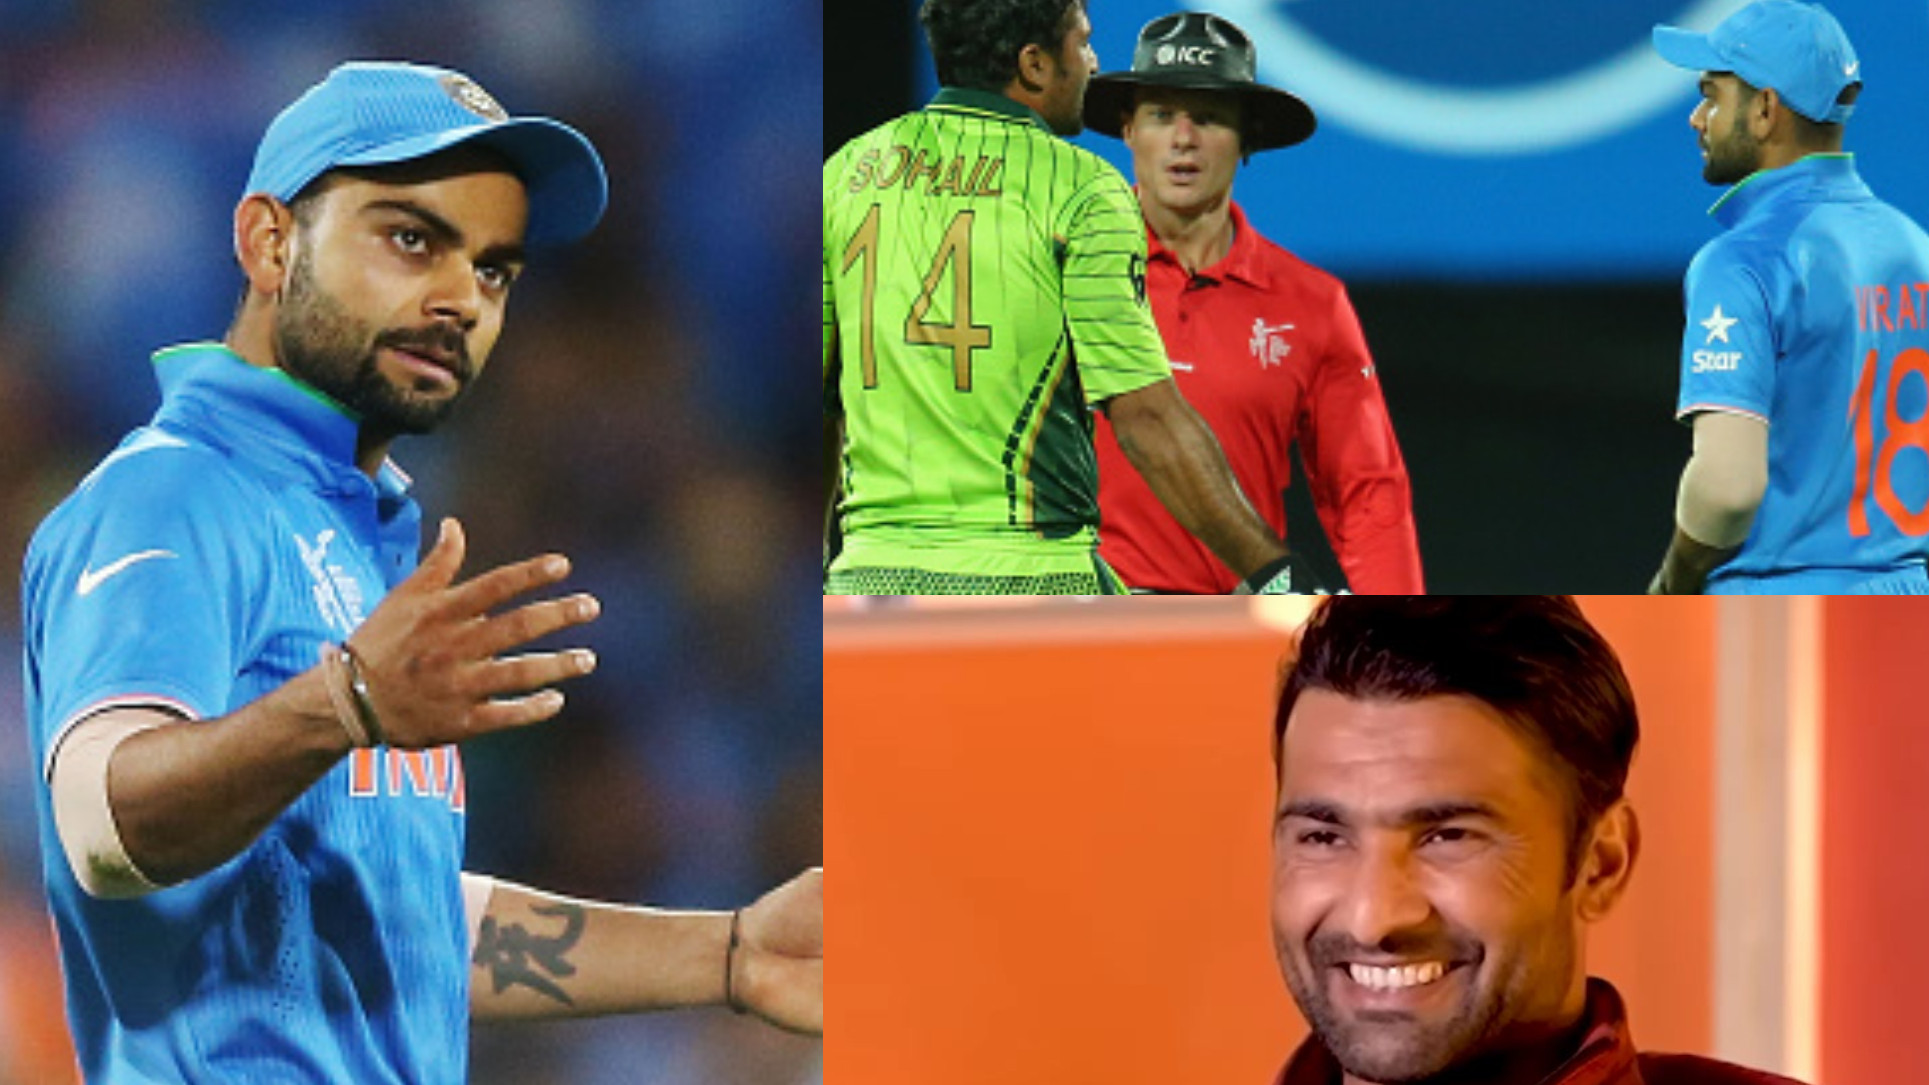 “‘Purana chawal hai yeh’ Dhoni told him to back off”- Sohail Khan makes stunning claim about his spat with Kohli during 2015 WC